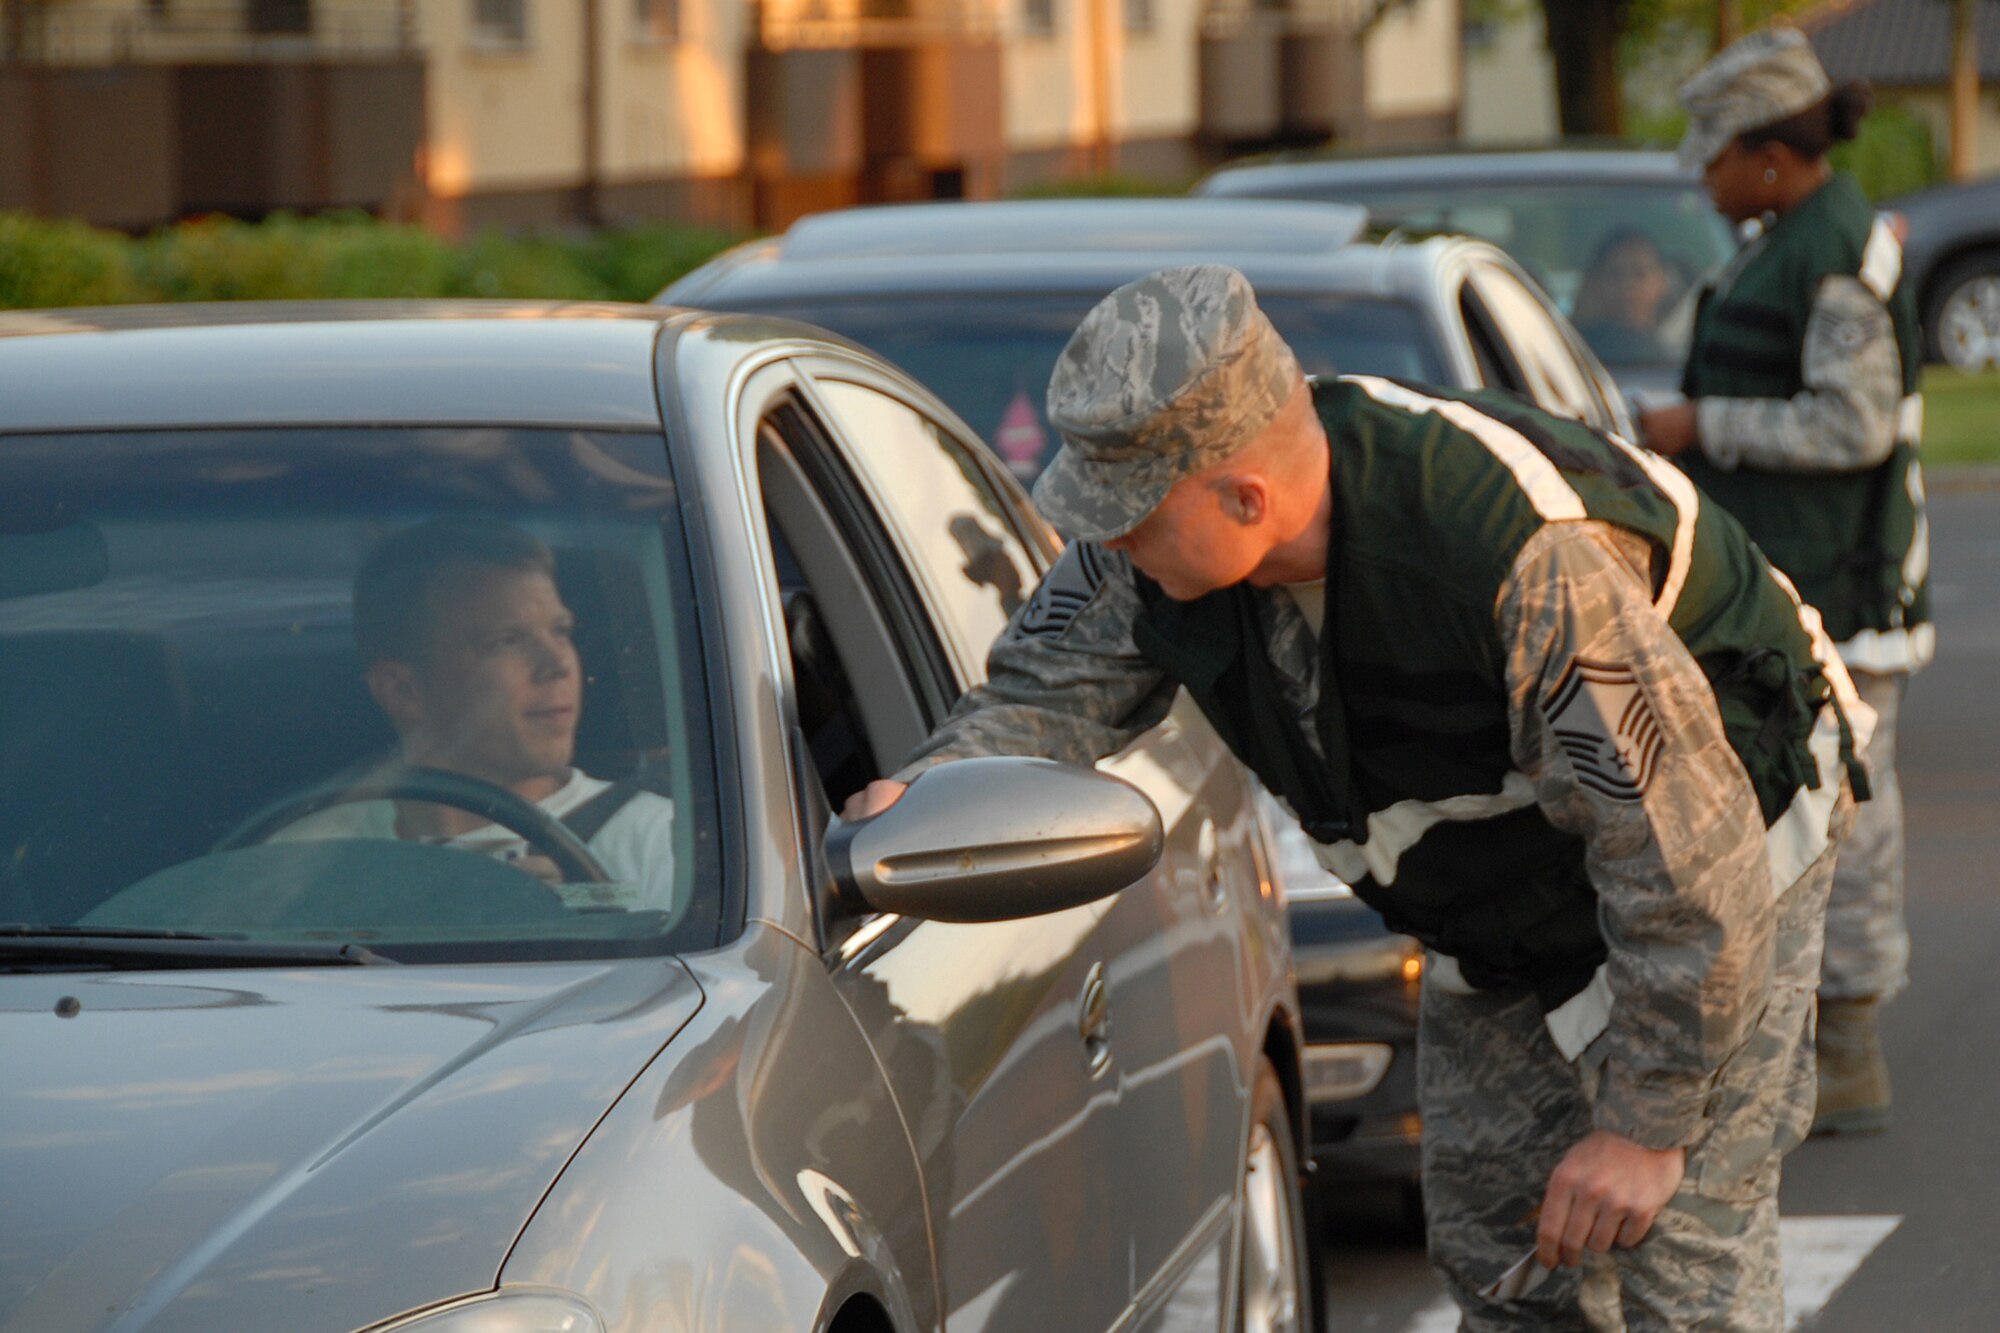 Senior Master Sgt. Scott Miller from the Chief's Group and Staff Sgt. Corina Gross from the Tier Two hand out Ride for Life cards to 52nd Fighter Wing members June 19, 2009, as they exit Bitburg Air Base, Germany. First Sgts.,Top III and First Four members were also on hand from 9 p.m. until 3 a.m. to remind Sabers to be safe and make responsible choices during the weekend.   (U.S. Air Force photo by Senior Master Sgt. Valerie J. Weaver)